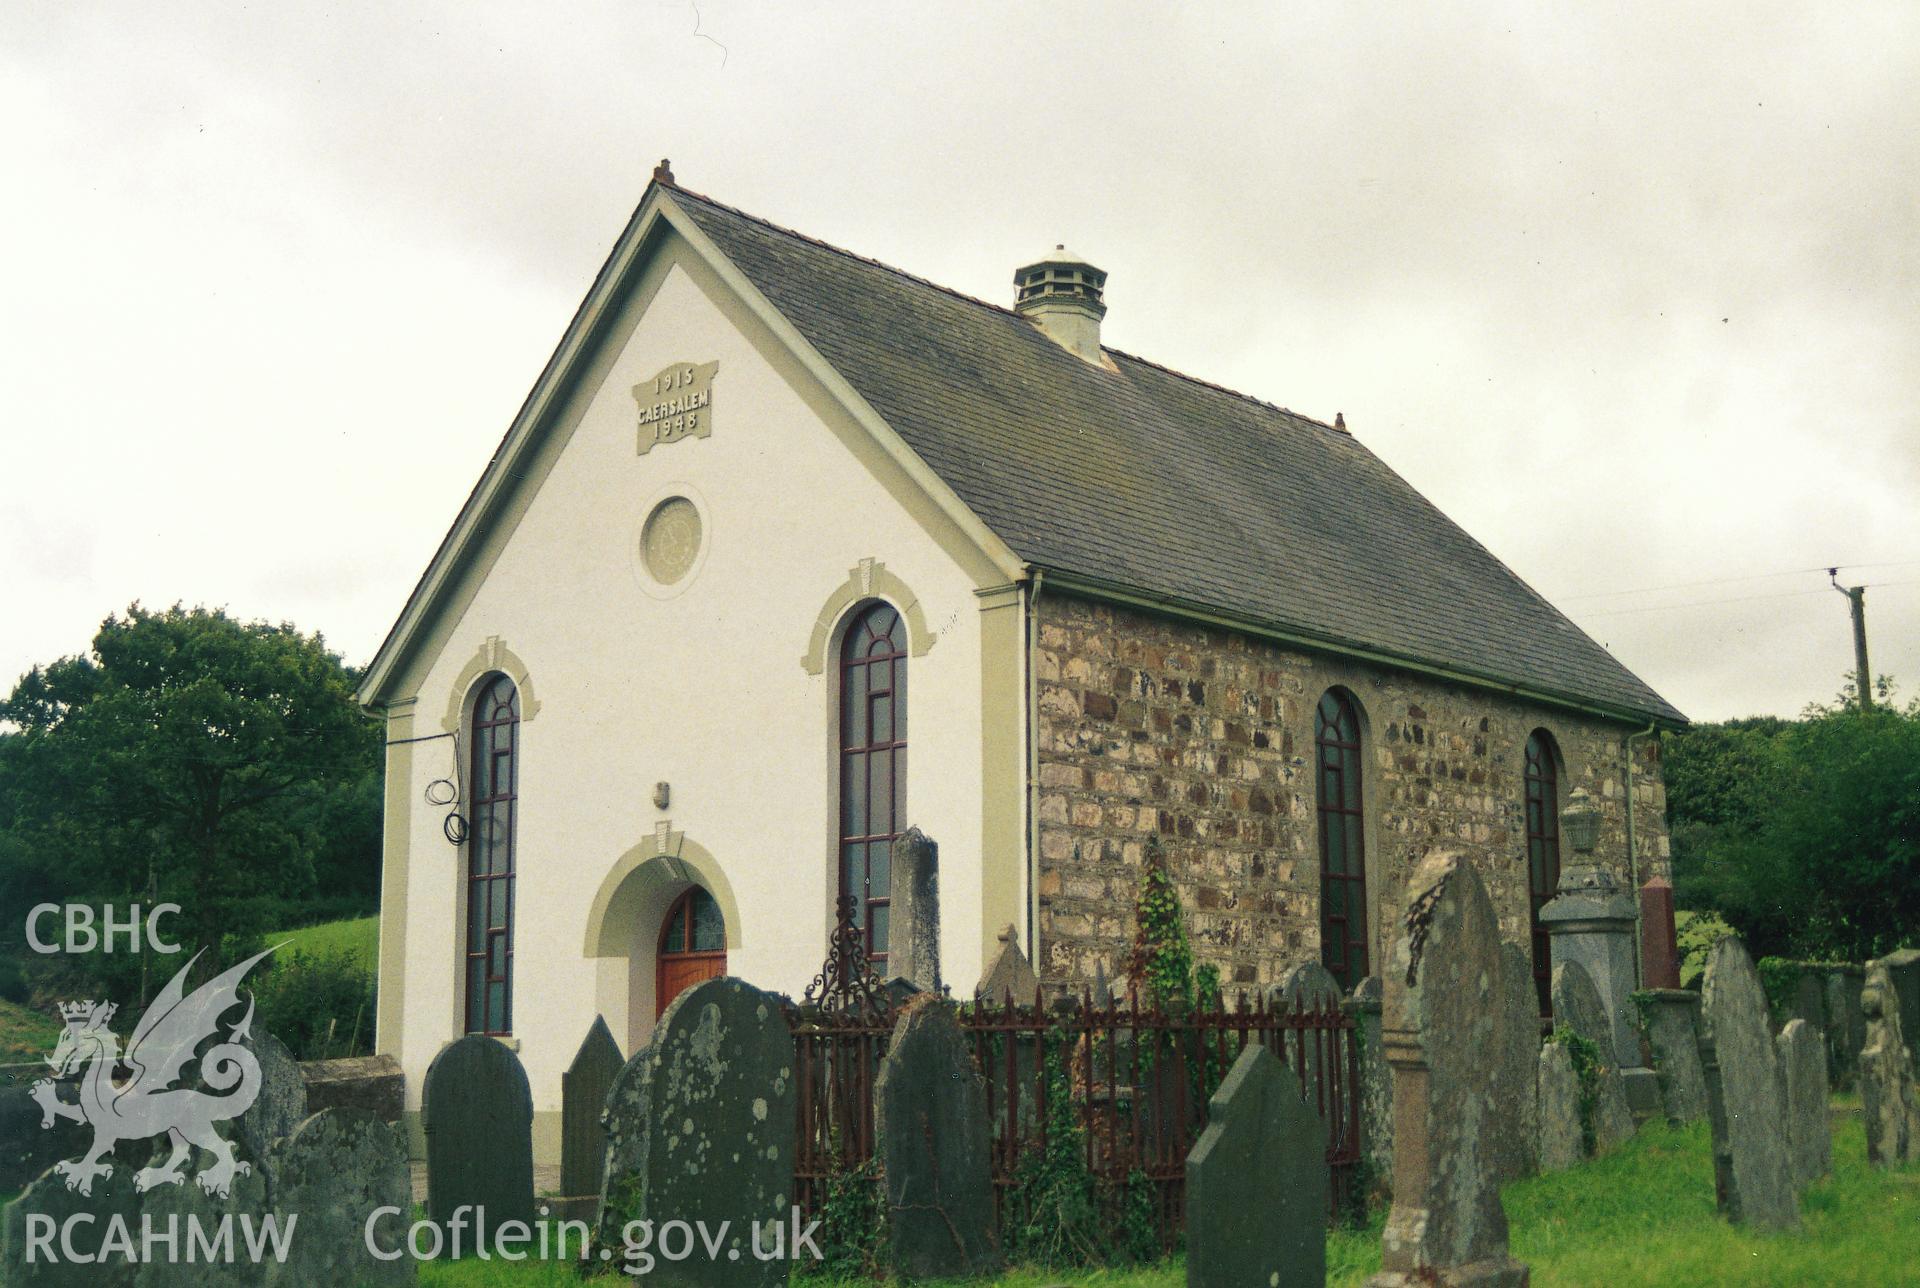 Digital copy of a colour photograph showing a general view of Caersalem Baptist Chapel, Nevern, taken by Robert Scourfield, 1996.